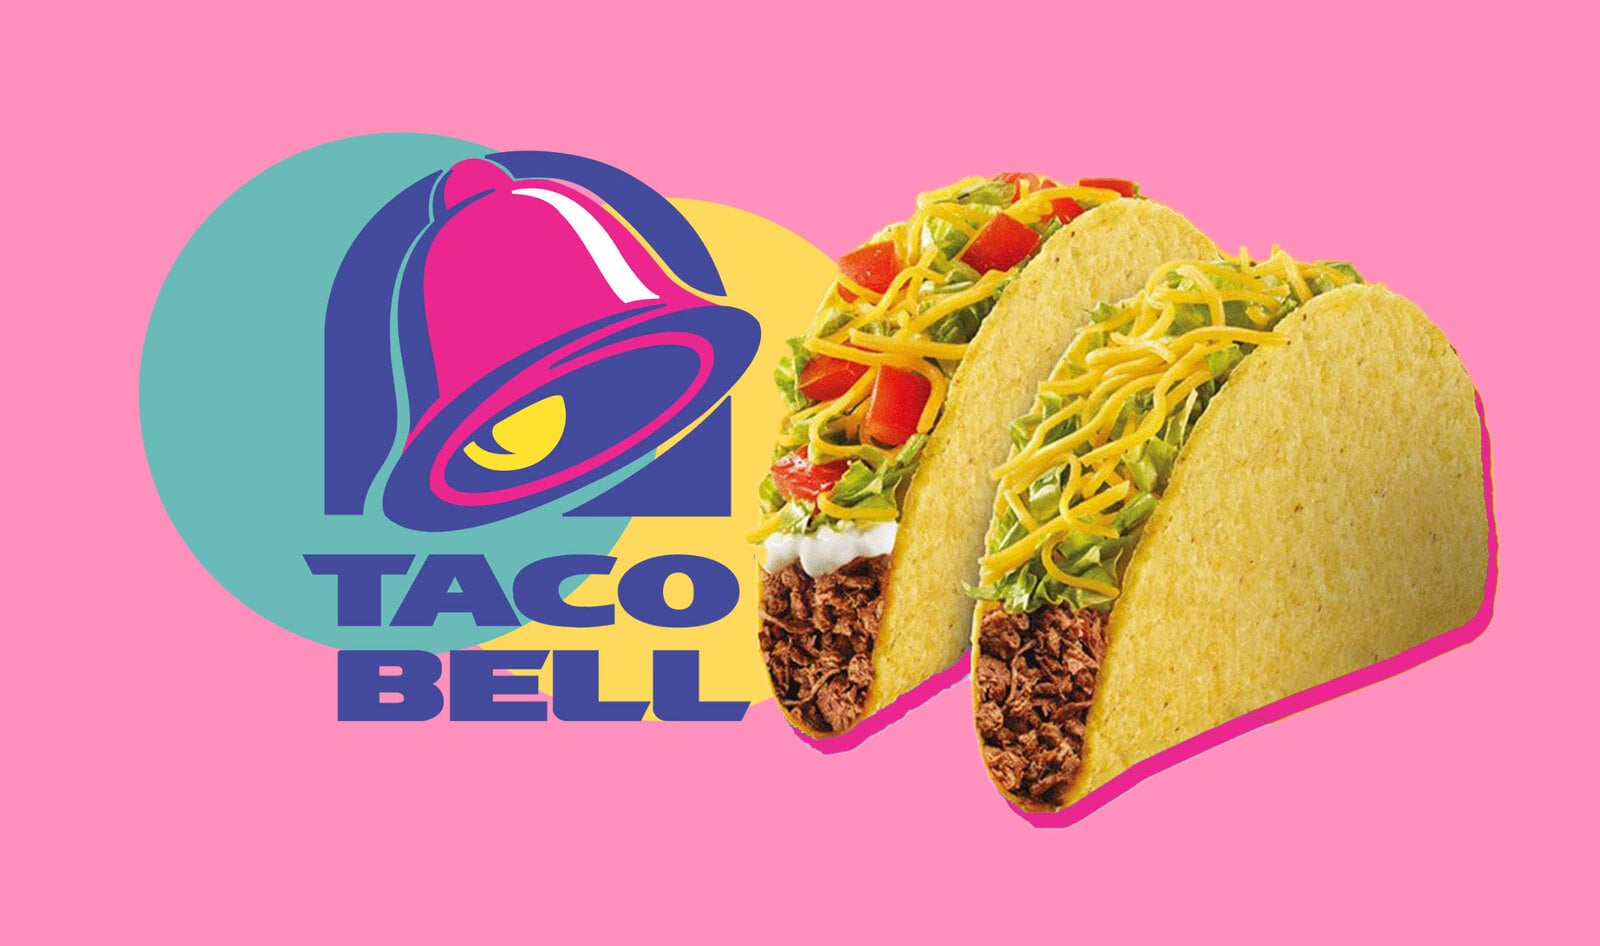 Taco Bell UK Adds New Vegan Meat Made From Oats